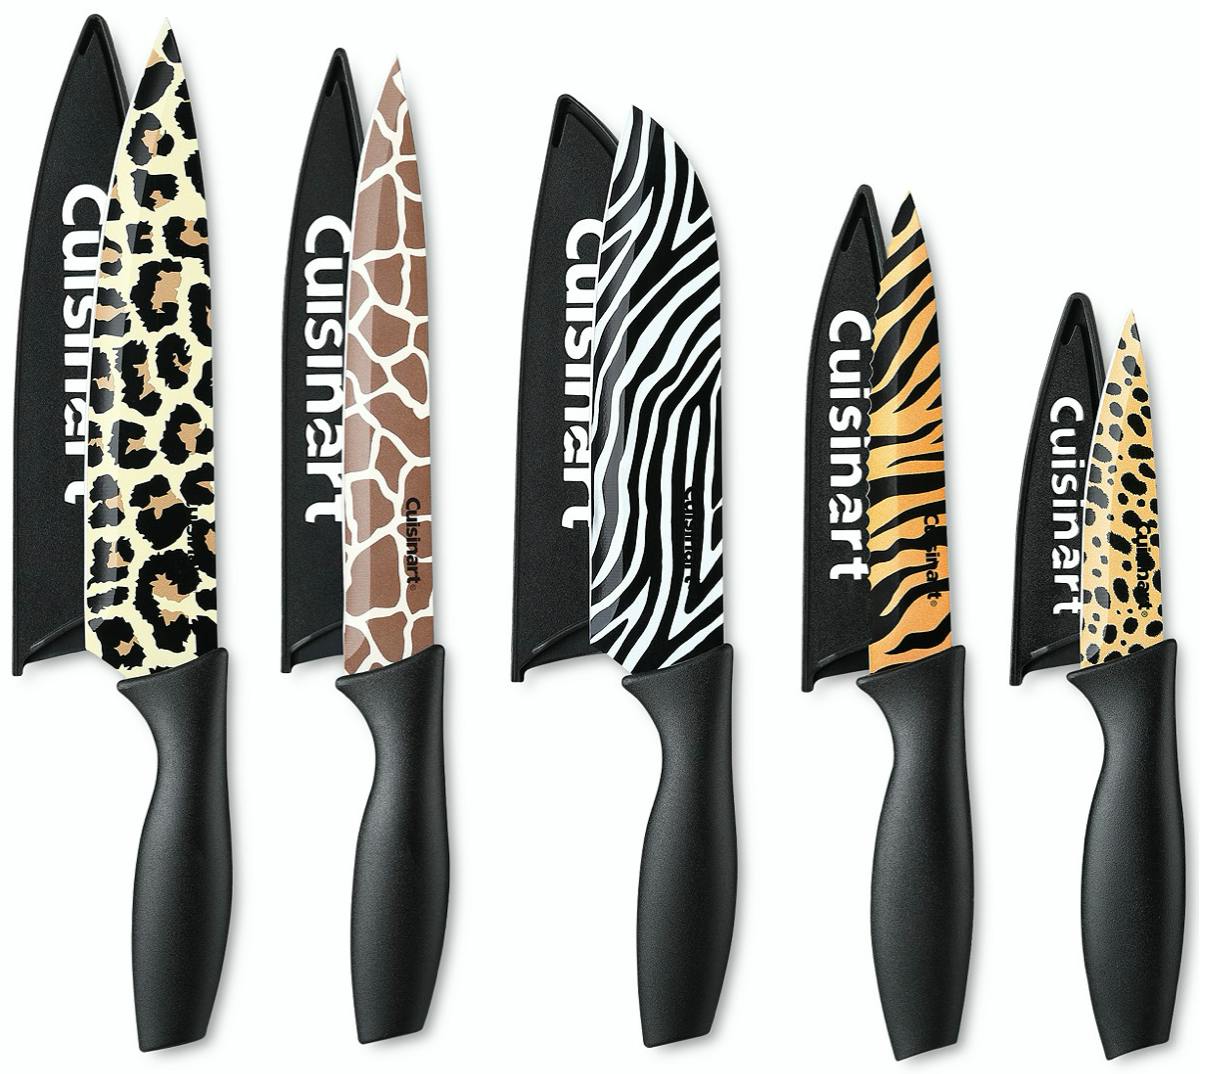 10-piece-cuisinart-knife-sets-only-13-99-at-macy-s-the-krazy-coupon